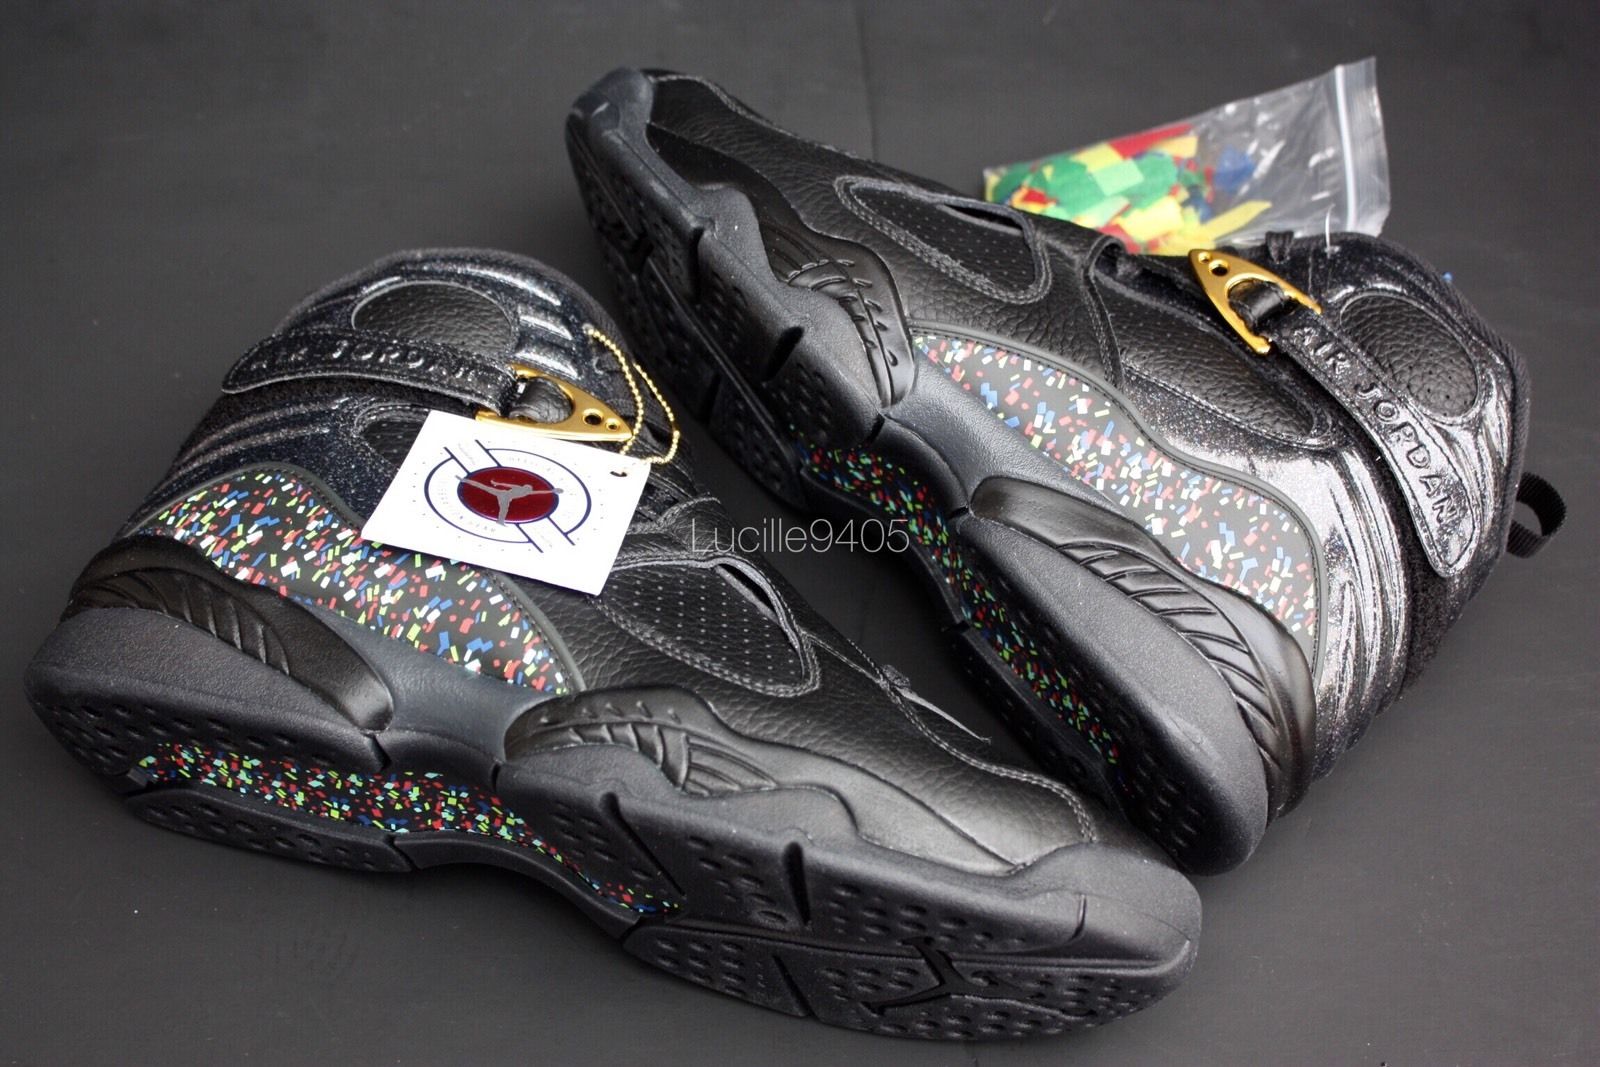 Air Jordan 8 Confetti from the Championship Pack - New Images - Air 23